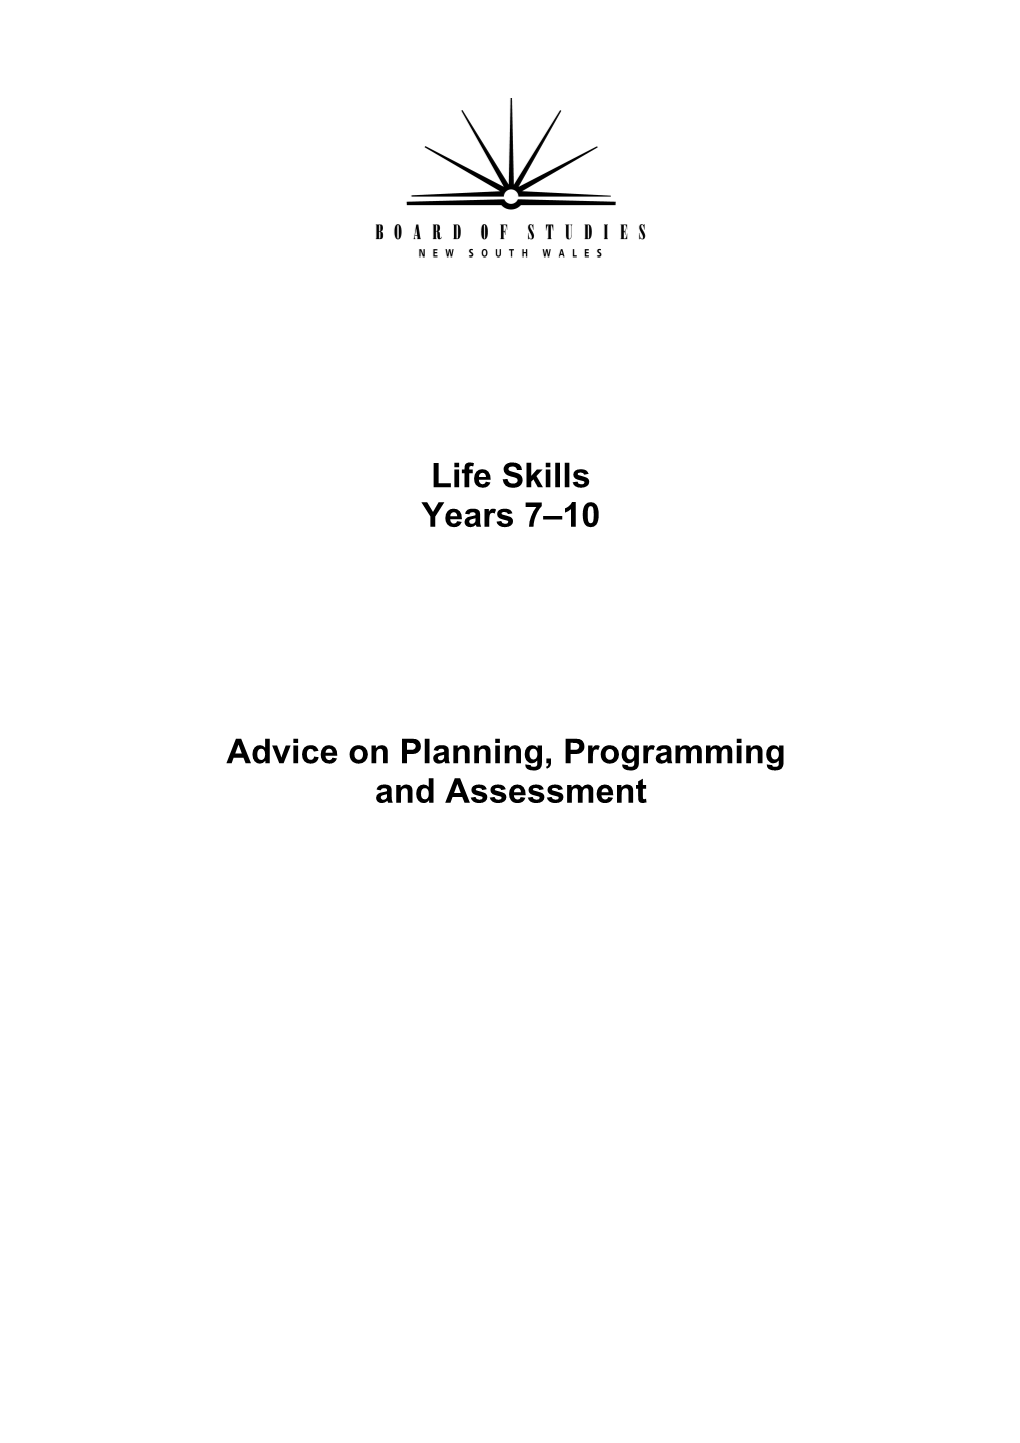 Advice on Planning, Programming and Assessment